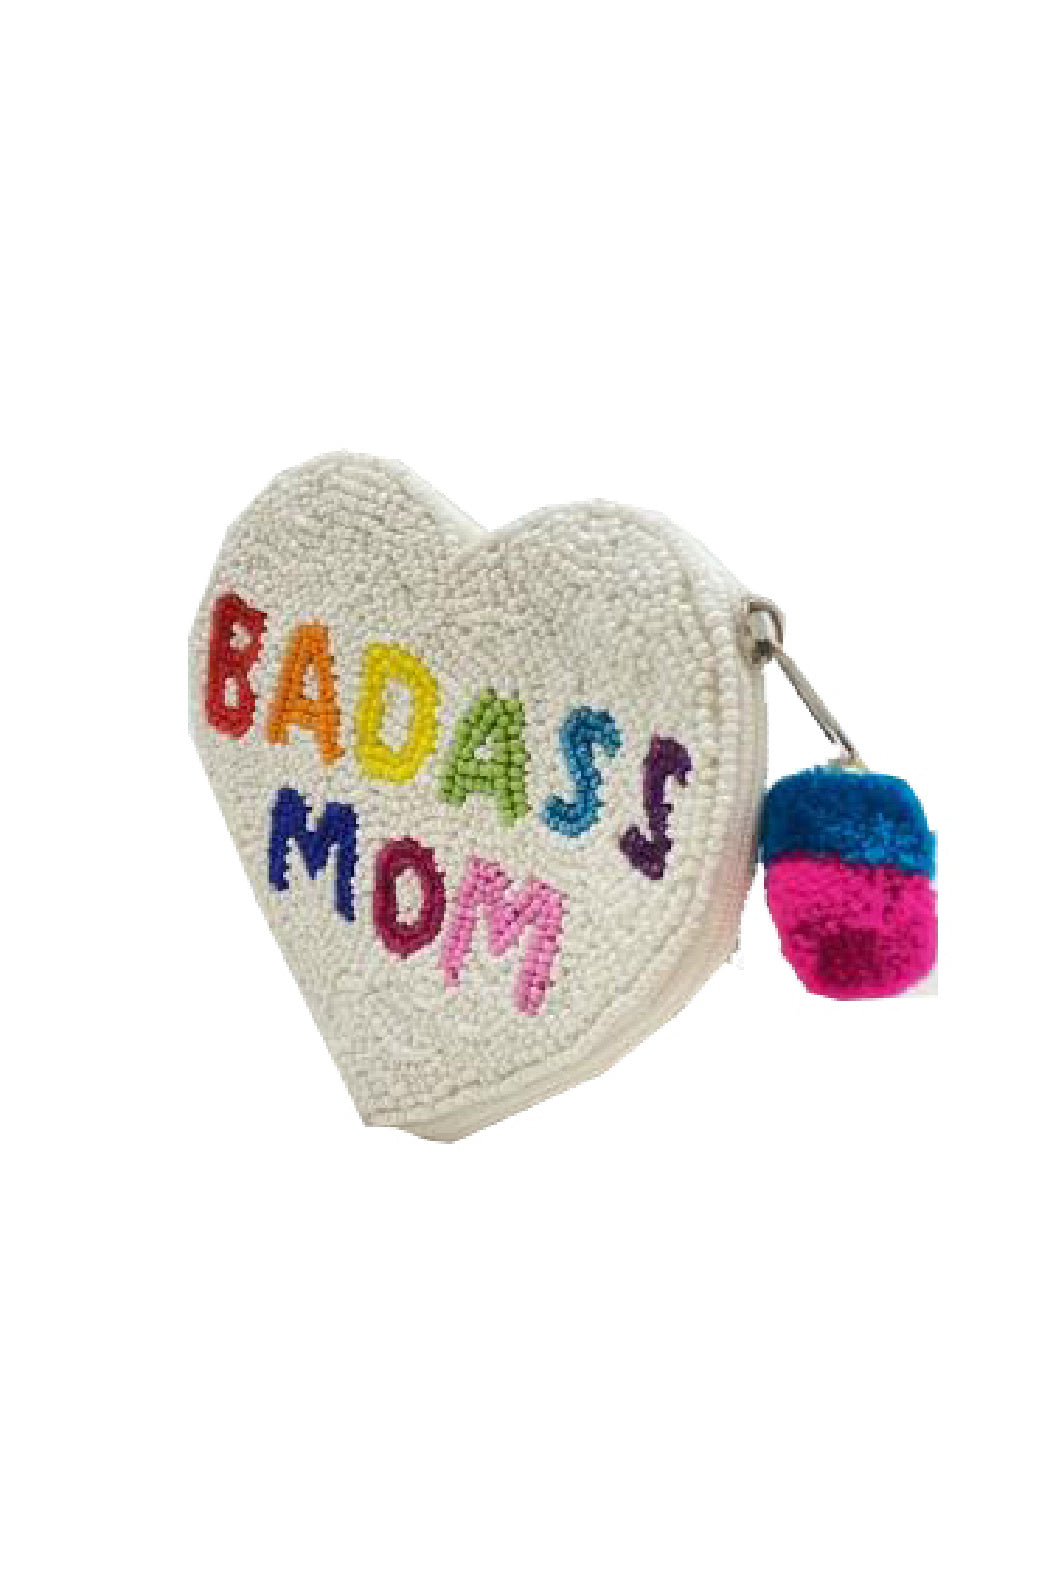 BAD ASS MOM Beaded Pouch Bag